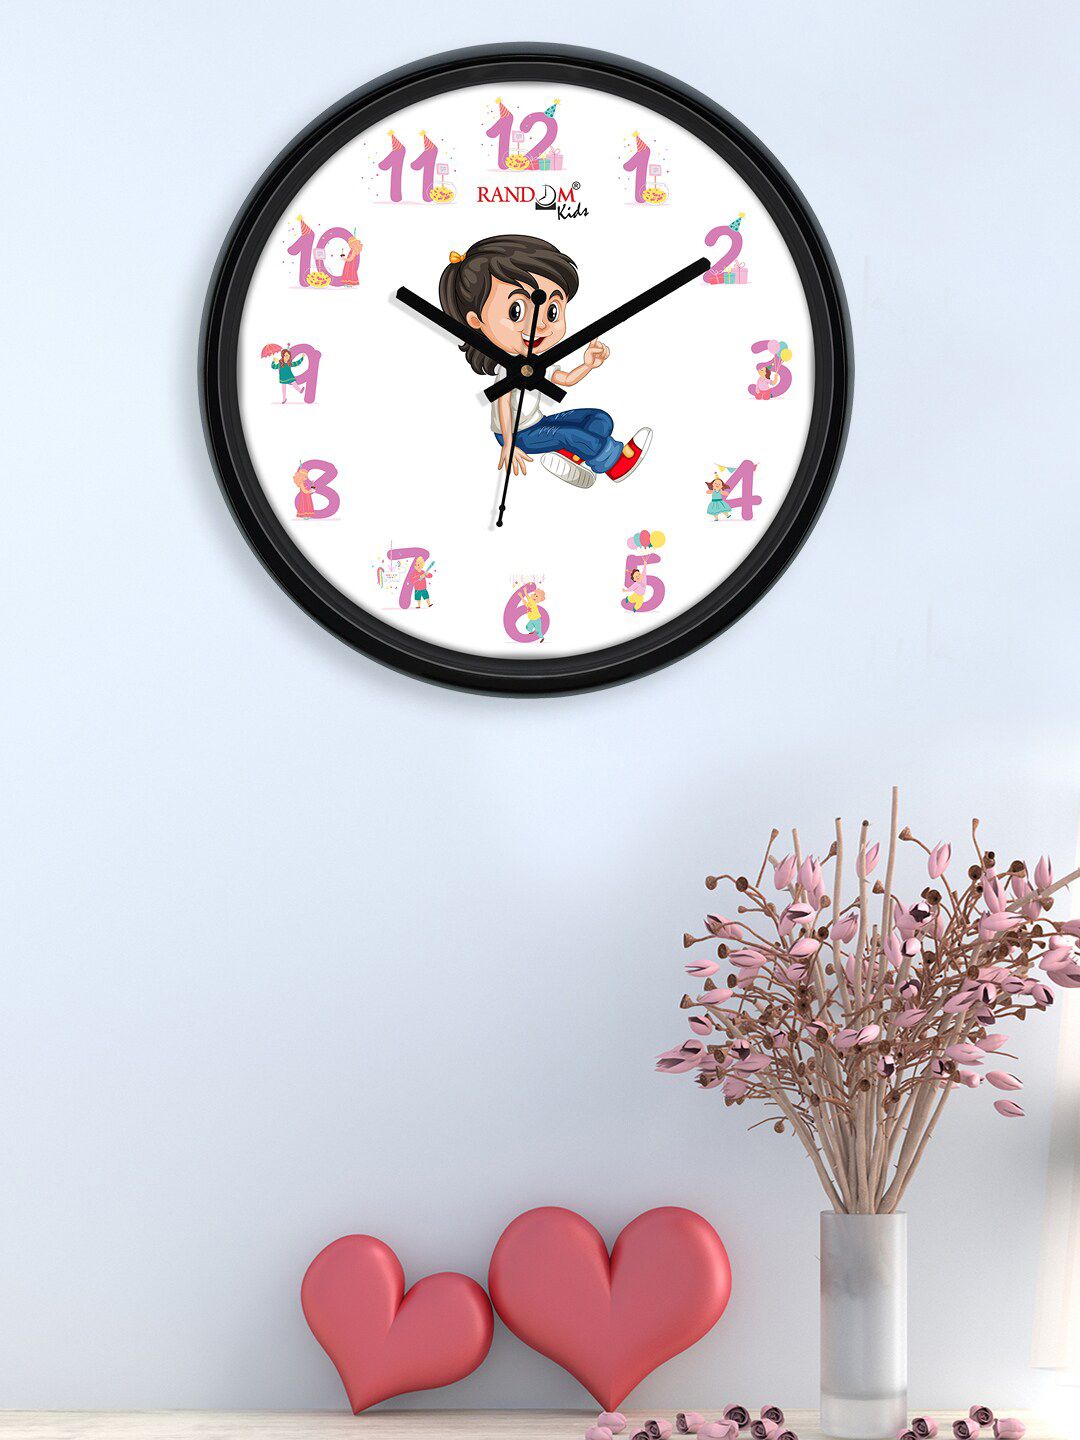 RANDOM White & Pink Smiling Kid Printed Contemporary Round Analogue Wall Clock Price in India